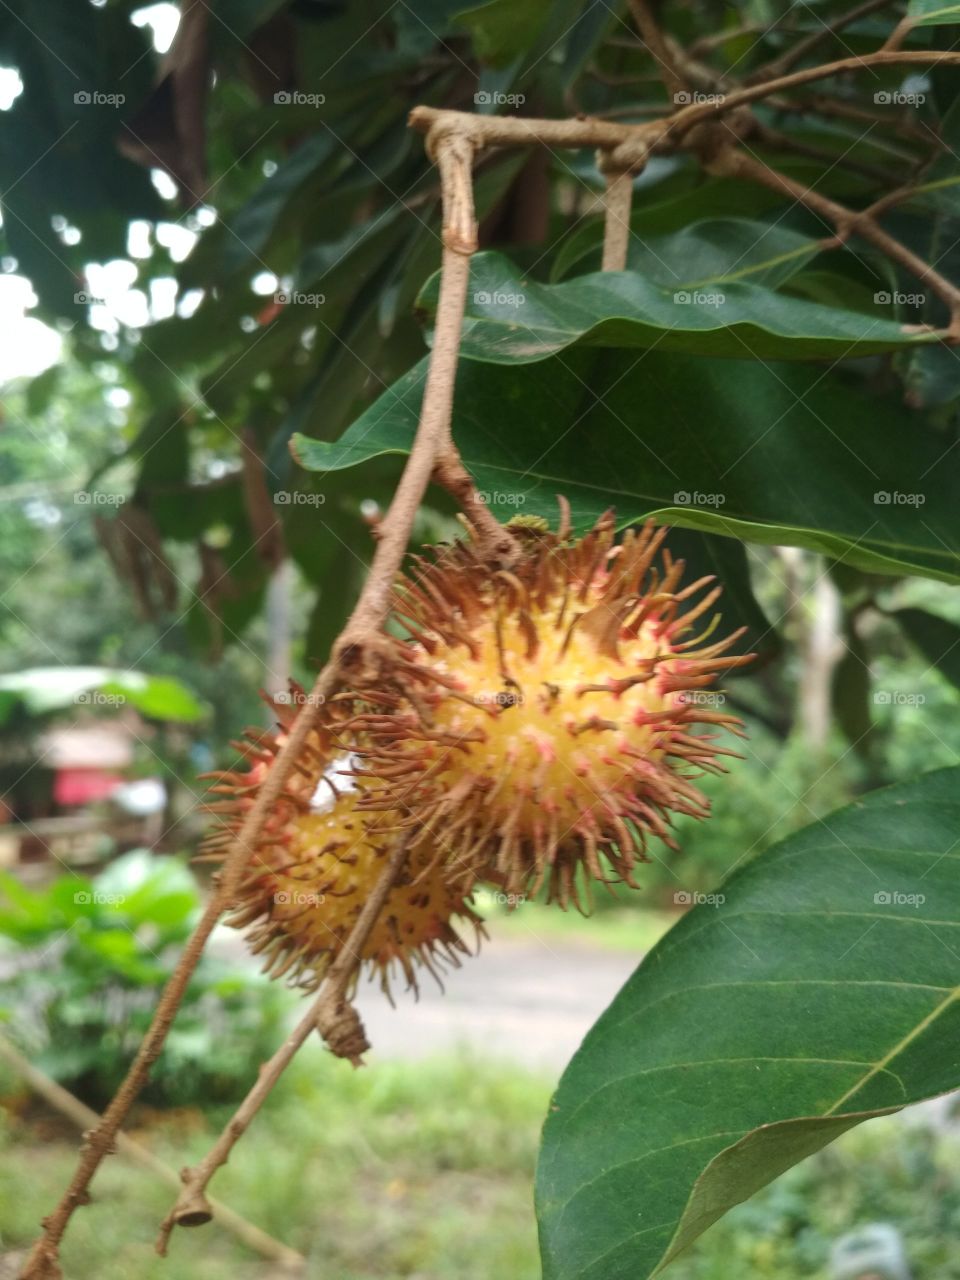 this fruit seasonal bear fruit only once a year. if mateng this fruit will berwarnah this fruit is seasonal fruiting only once a year. if this fruit mateng buah ini akan berwarnMateng this fruit will be red ... his fruit is abuah in this white and sweet seed